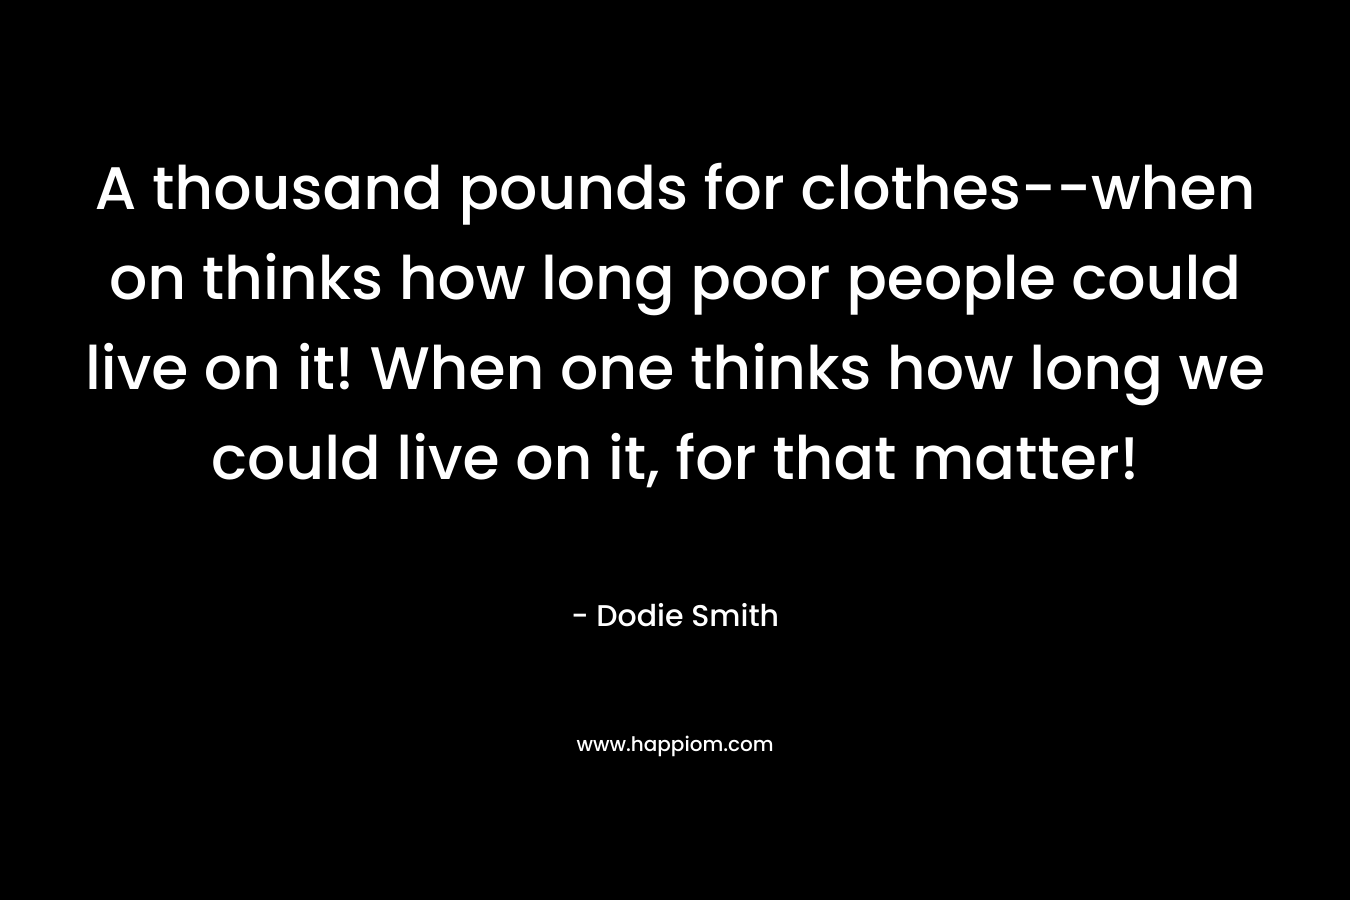 A thousand pounds for clothes--when on thinks how long poor people could live on it! When one thinks how long we could live on it, for that matter!